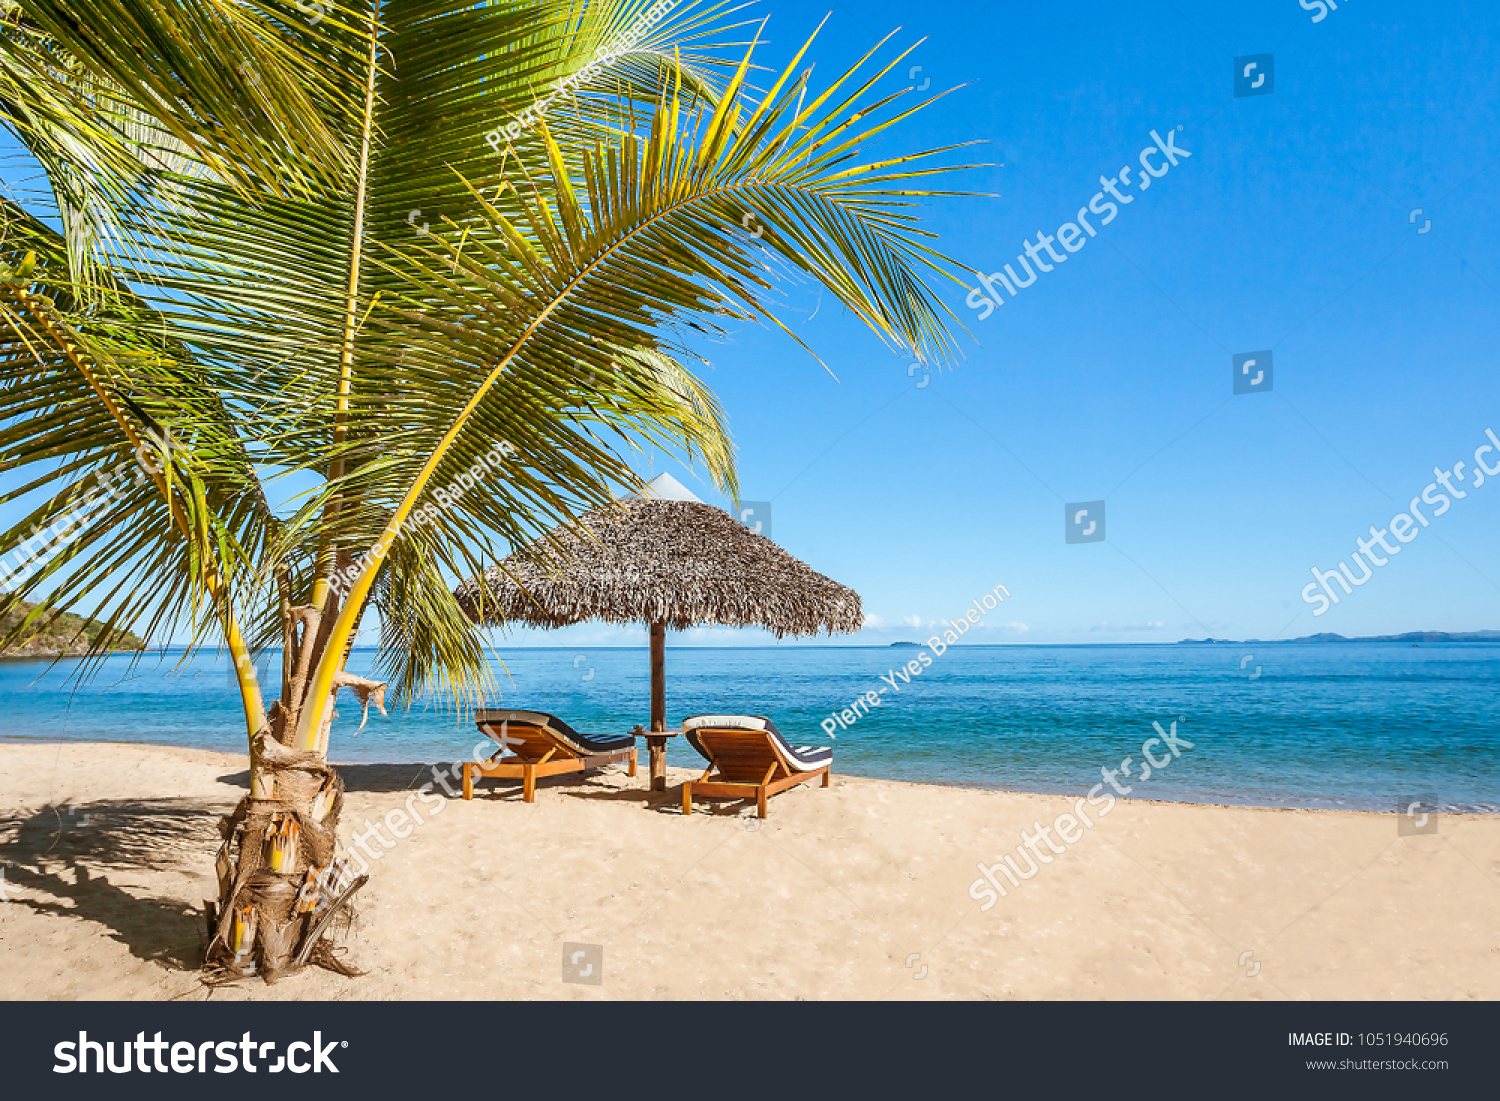 Two sunbeds under a straw umbrella on the tropical beach of Nosy Be, Madagascar #1051940696